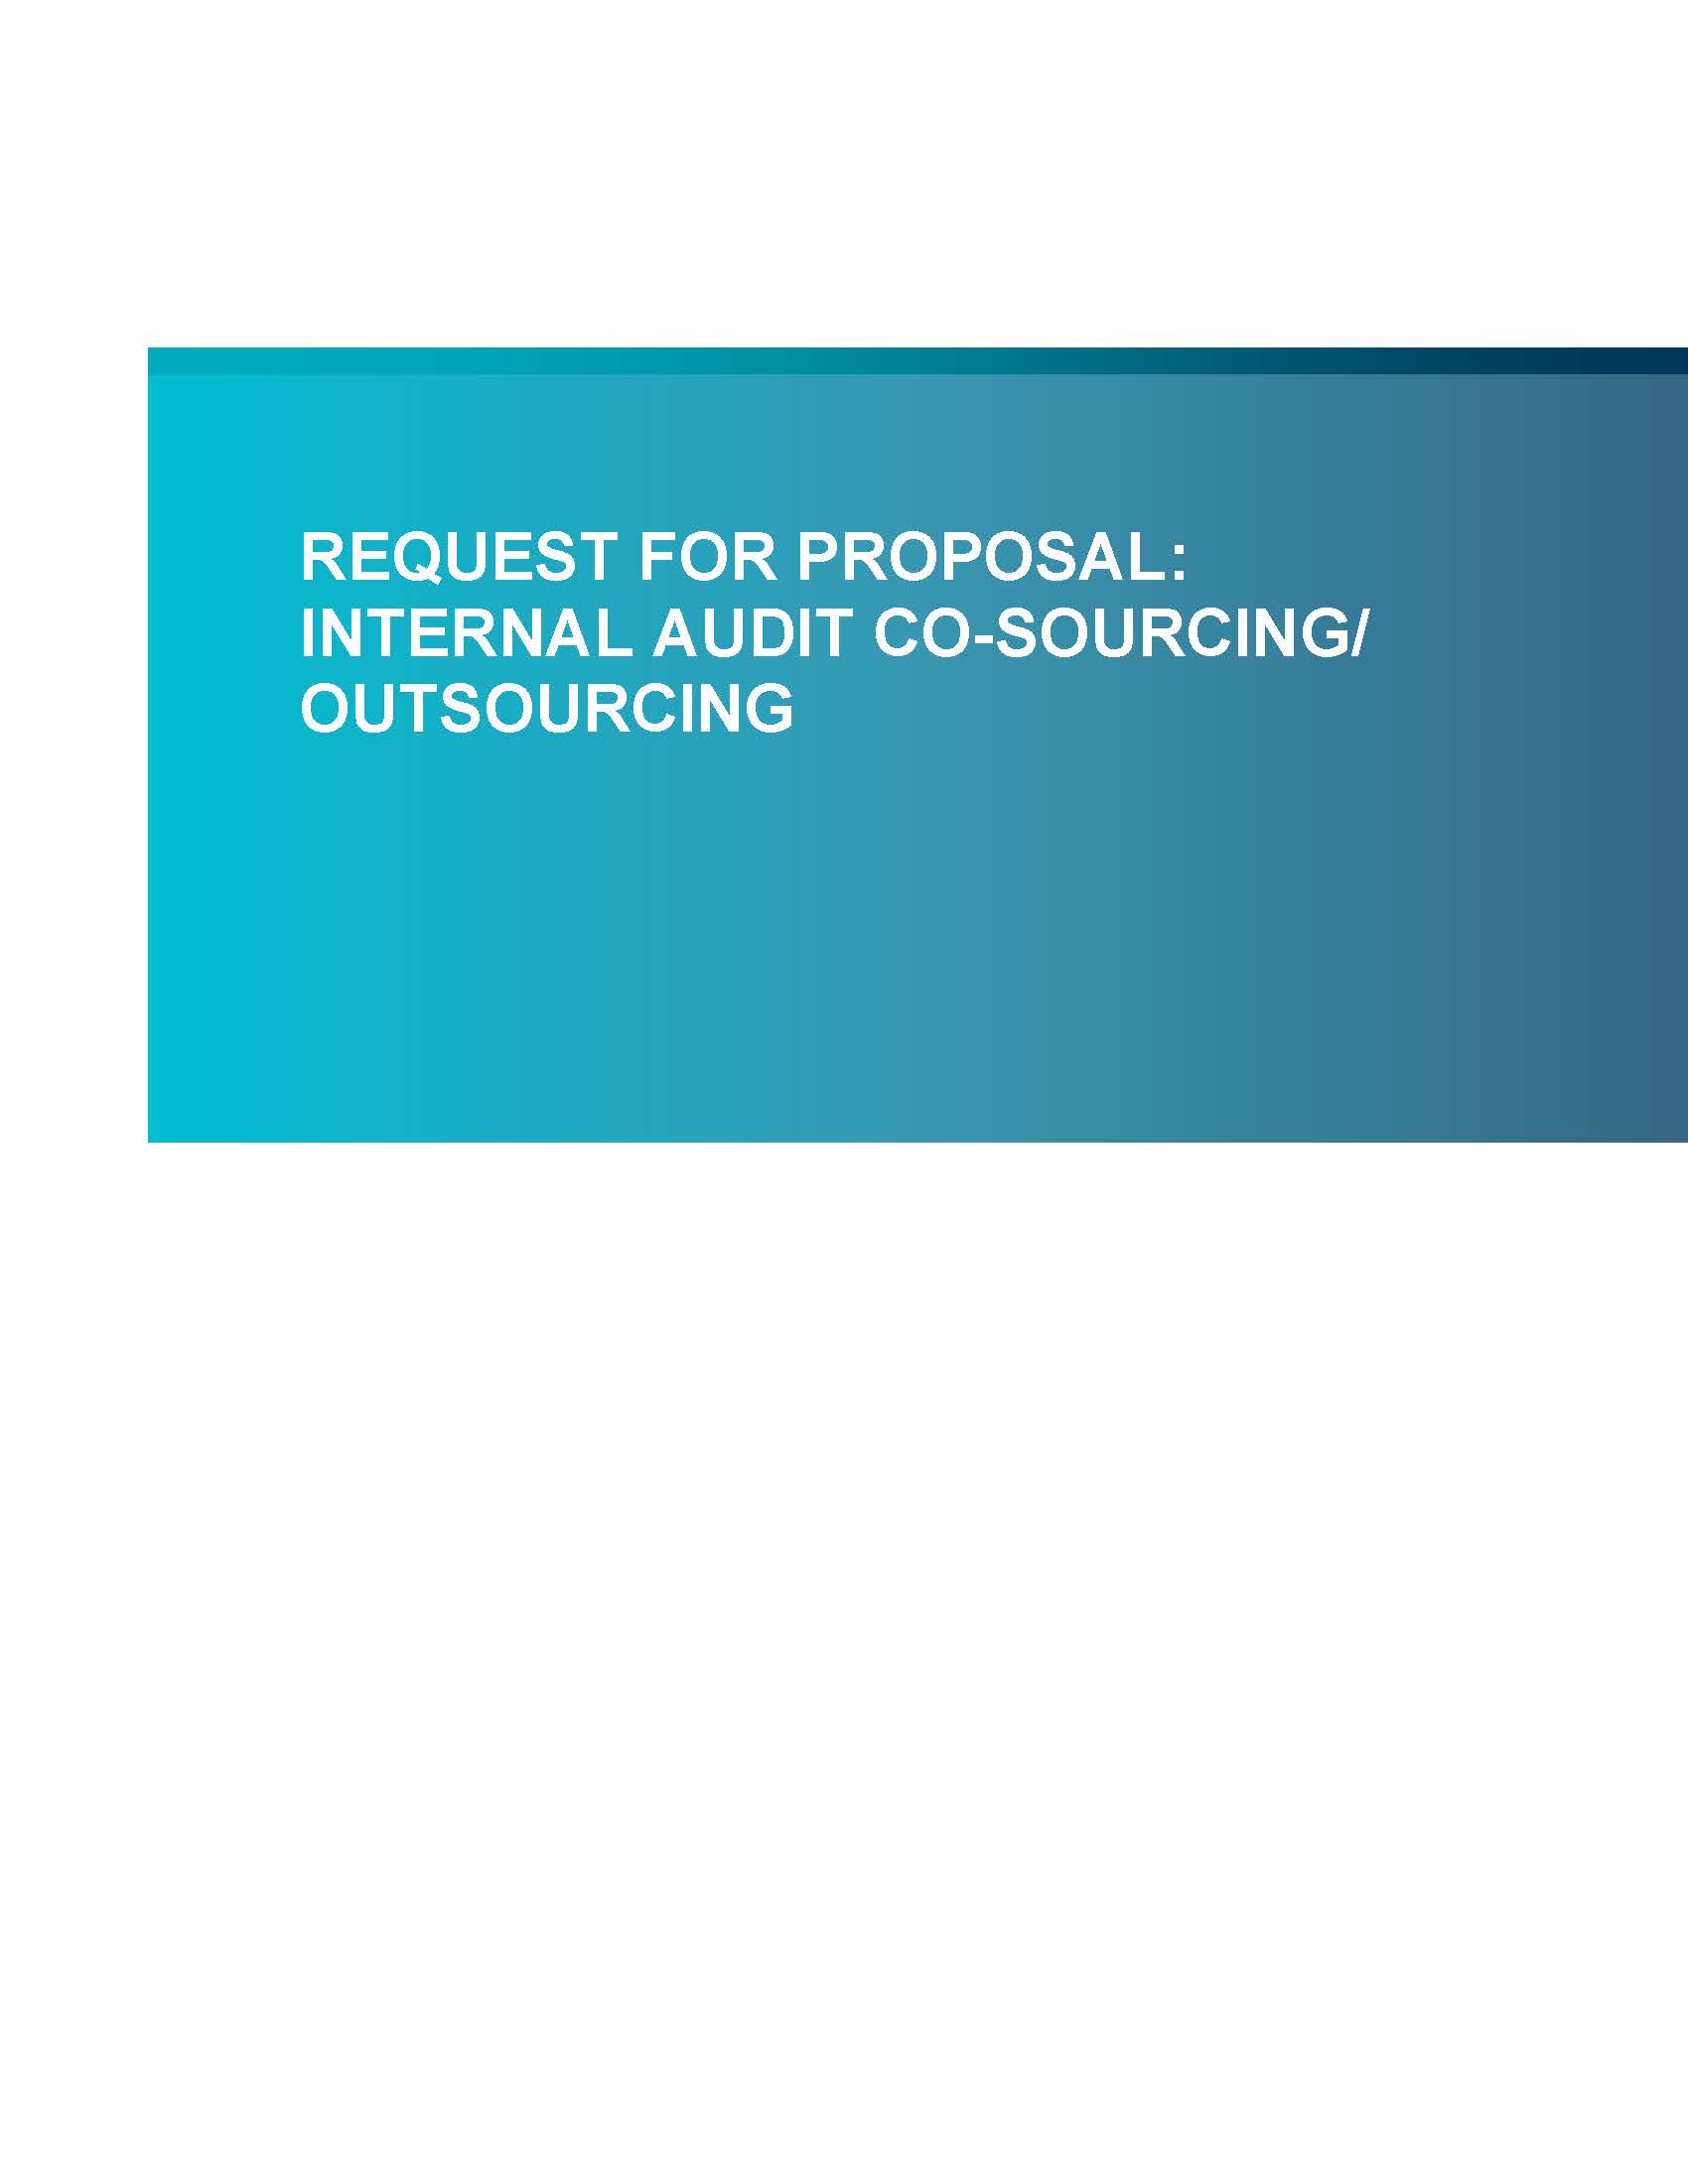 Request for Proposal: Internal Audit Co-Sourcing/Outsourcing